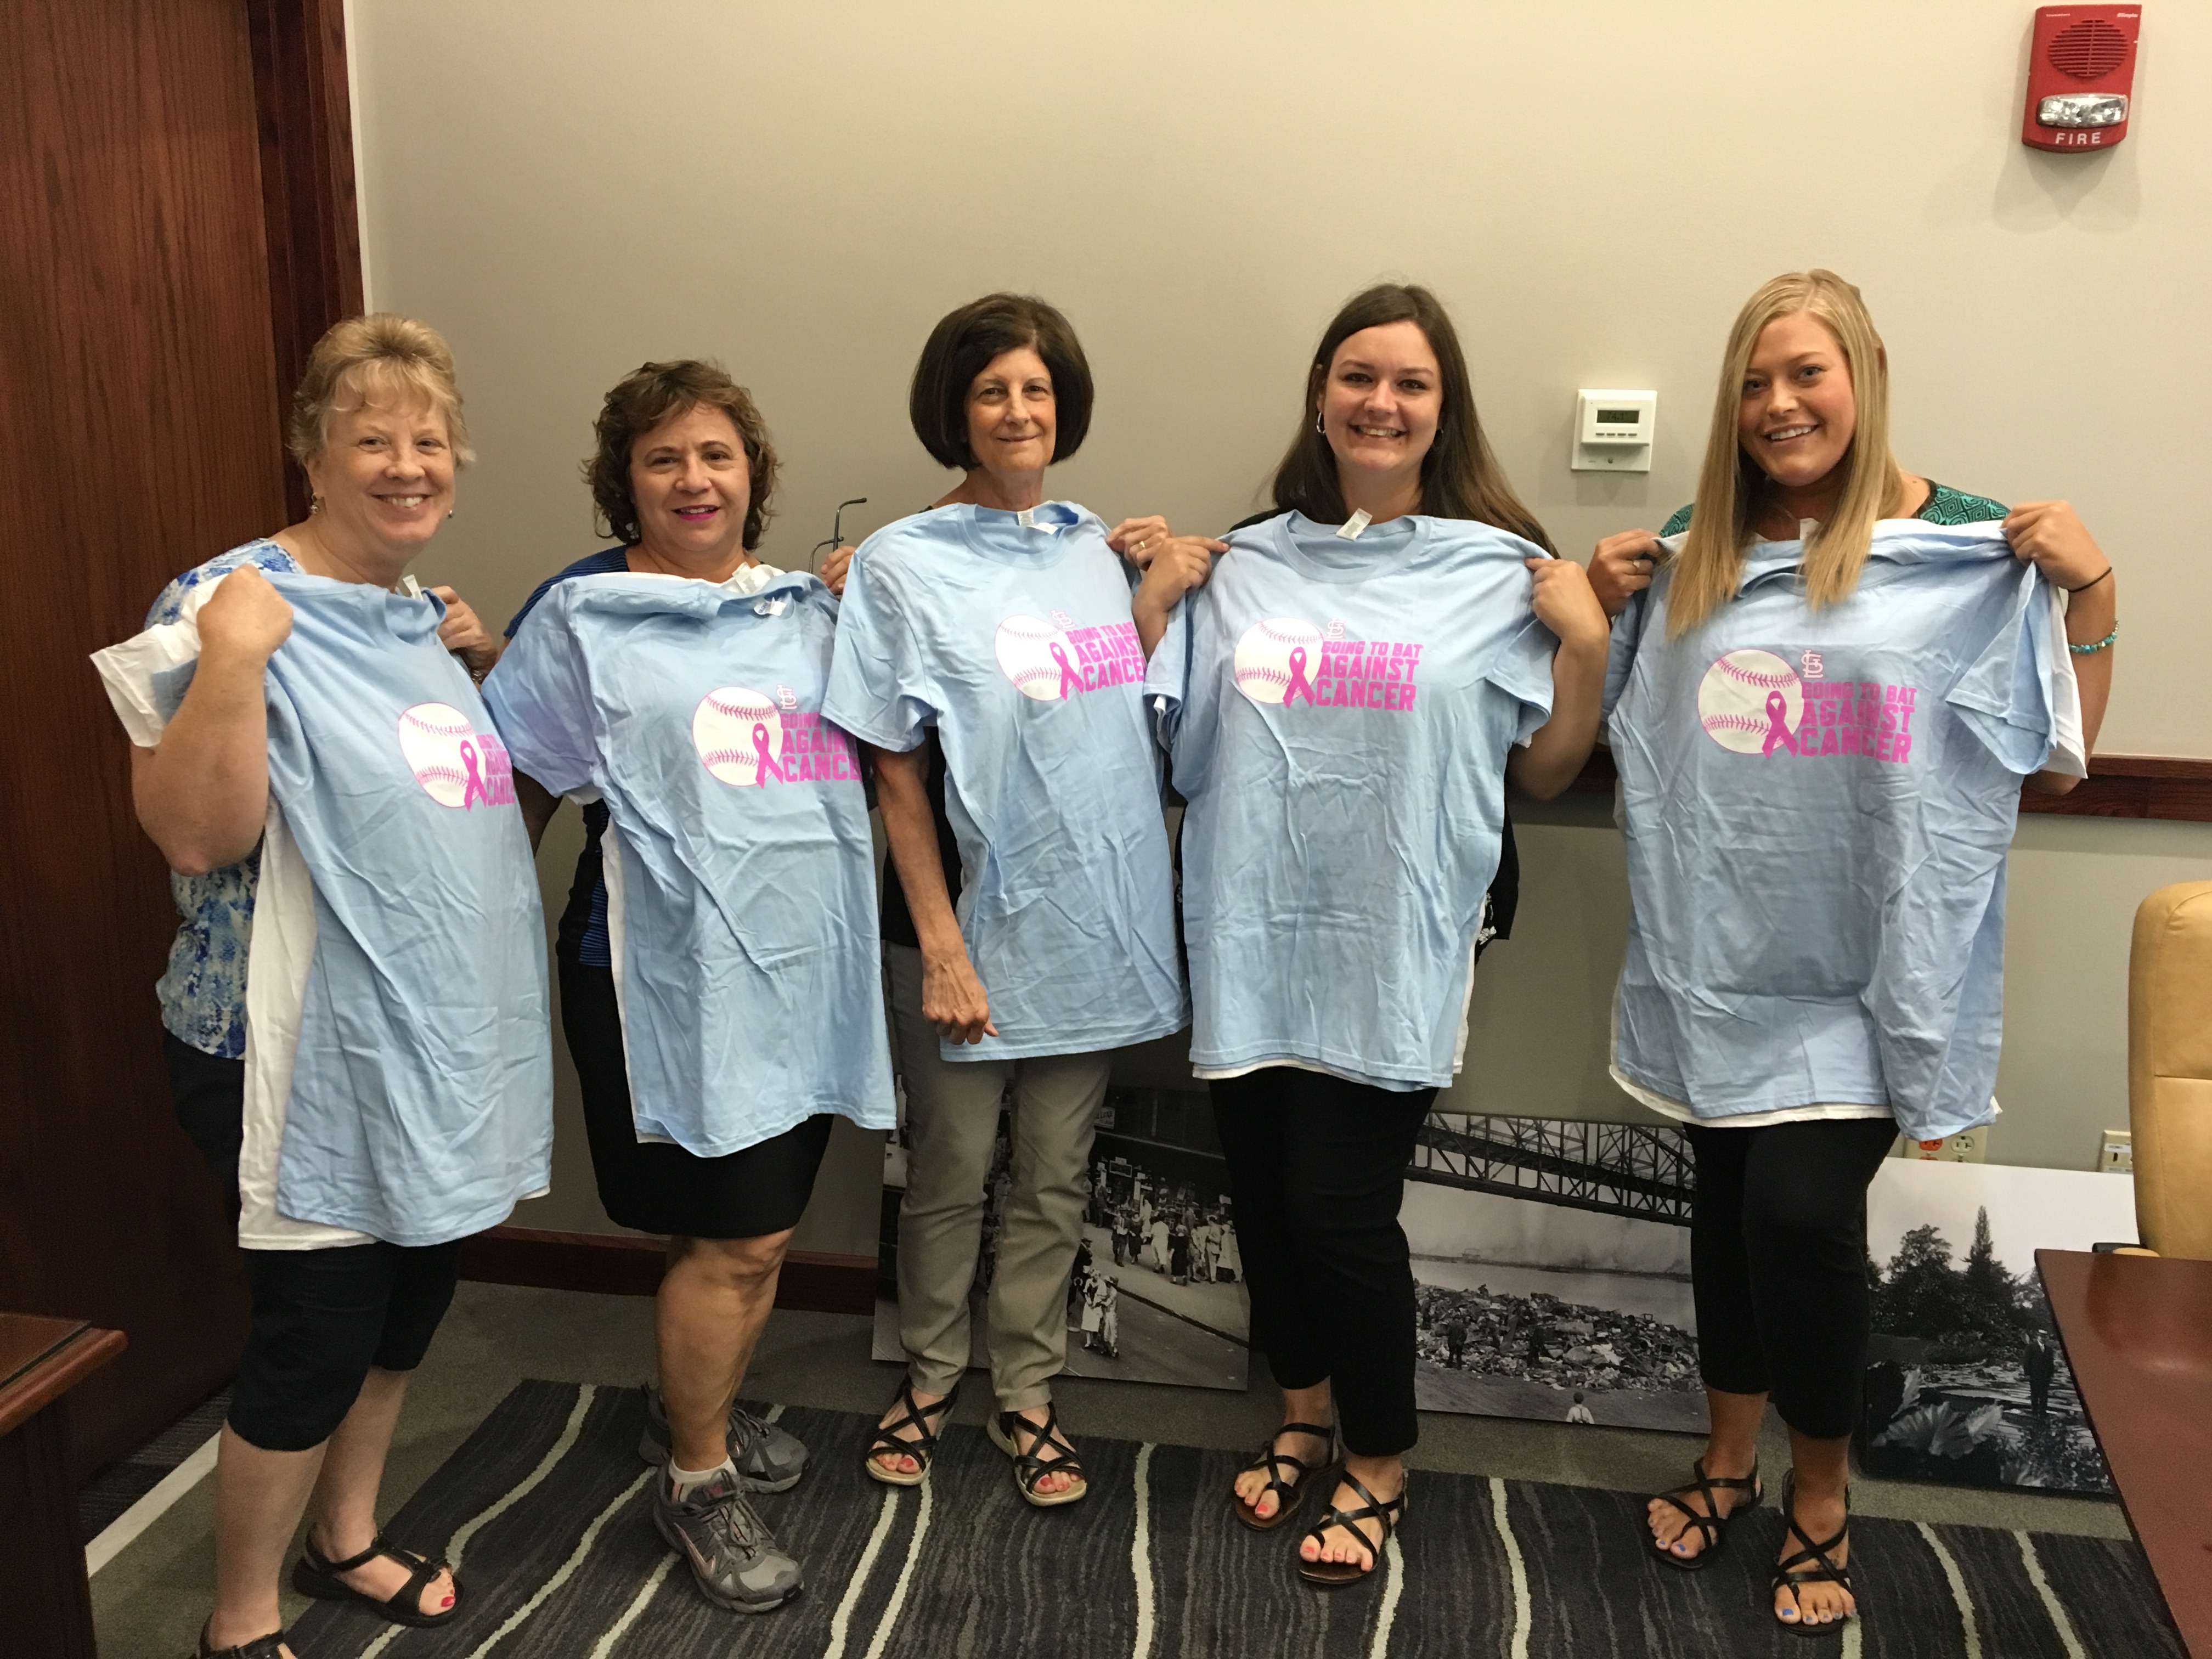 Collector of Revenue employees are ready for the 2018 St. Louis Komen Race for the Cure